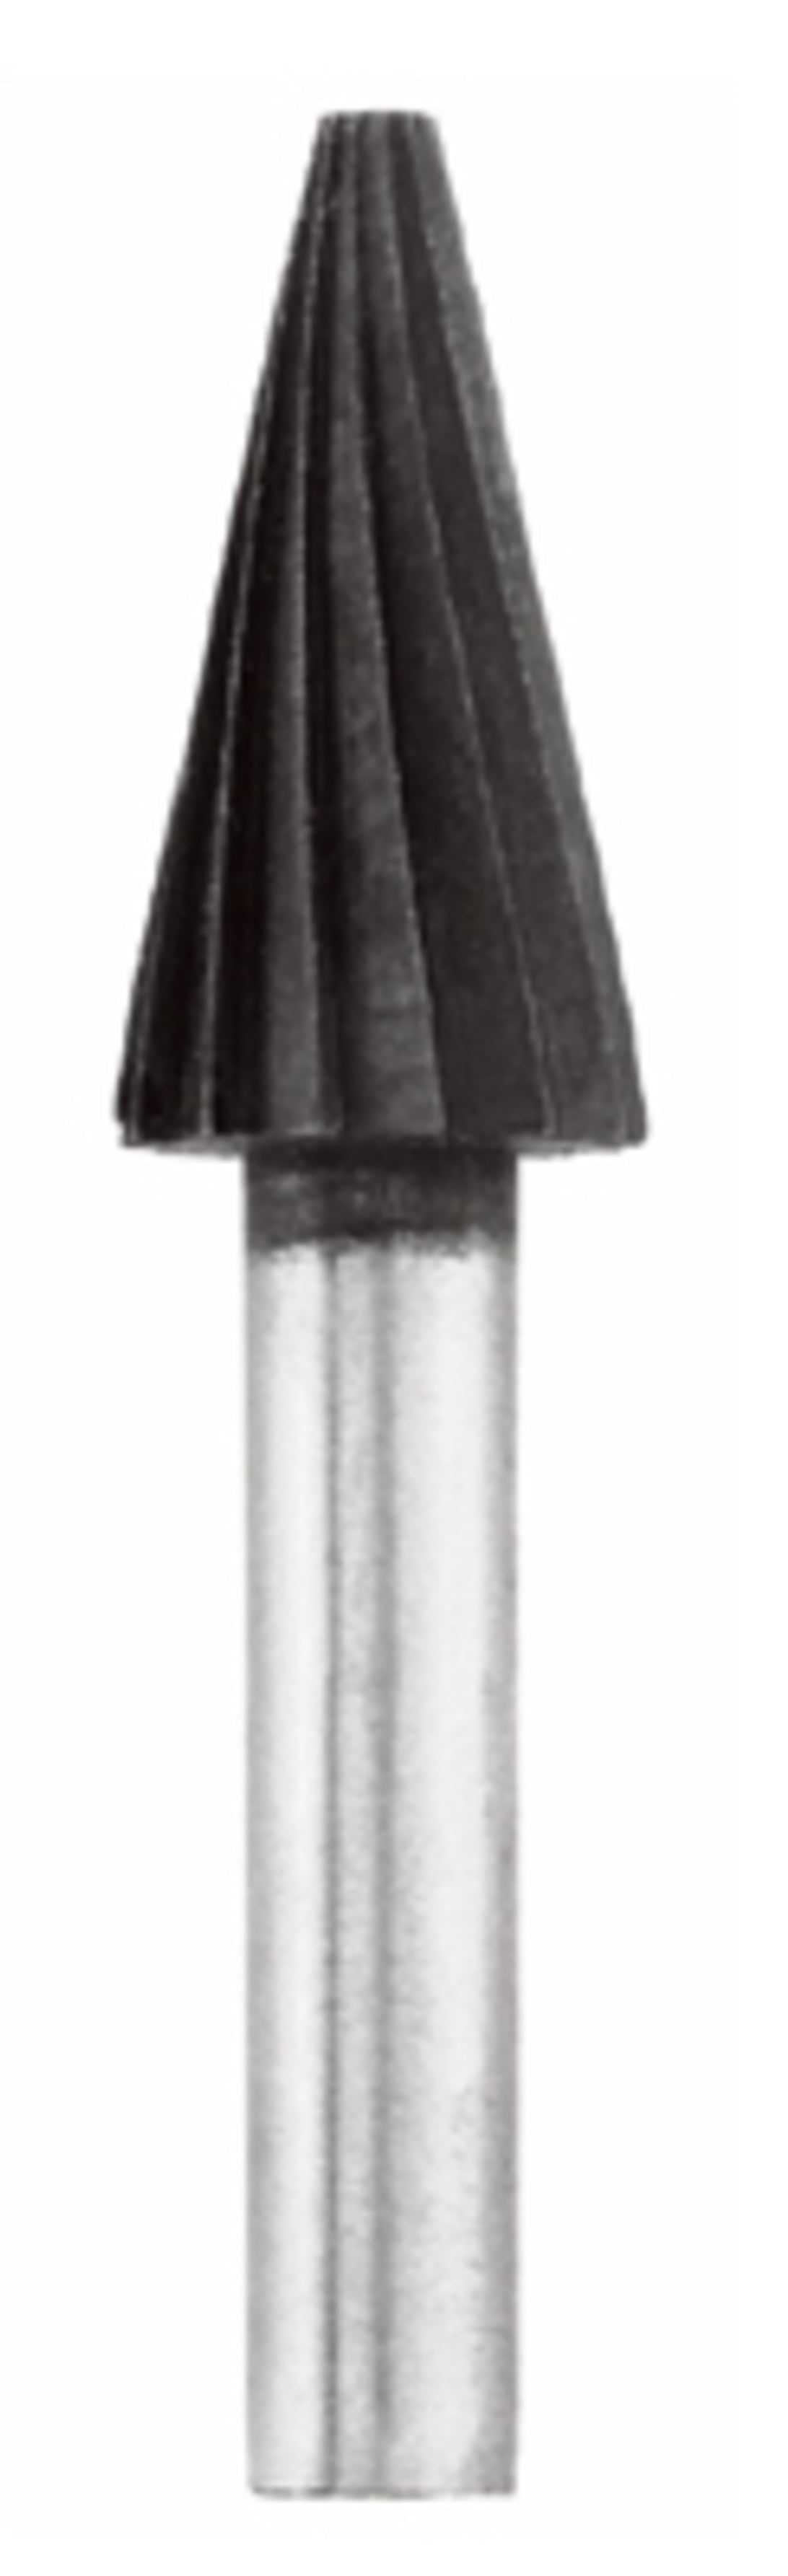 Century Drill & Tool 75405 Cone Shaped Rotary File, 1/2 Inch x 7/8 Inch